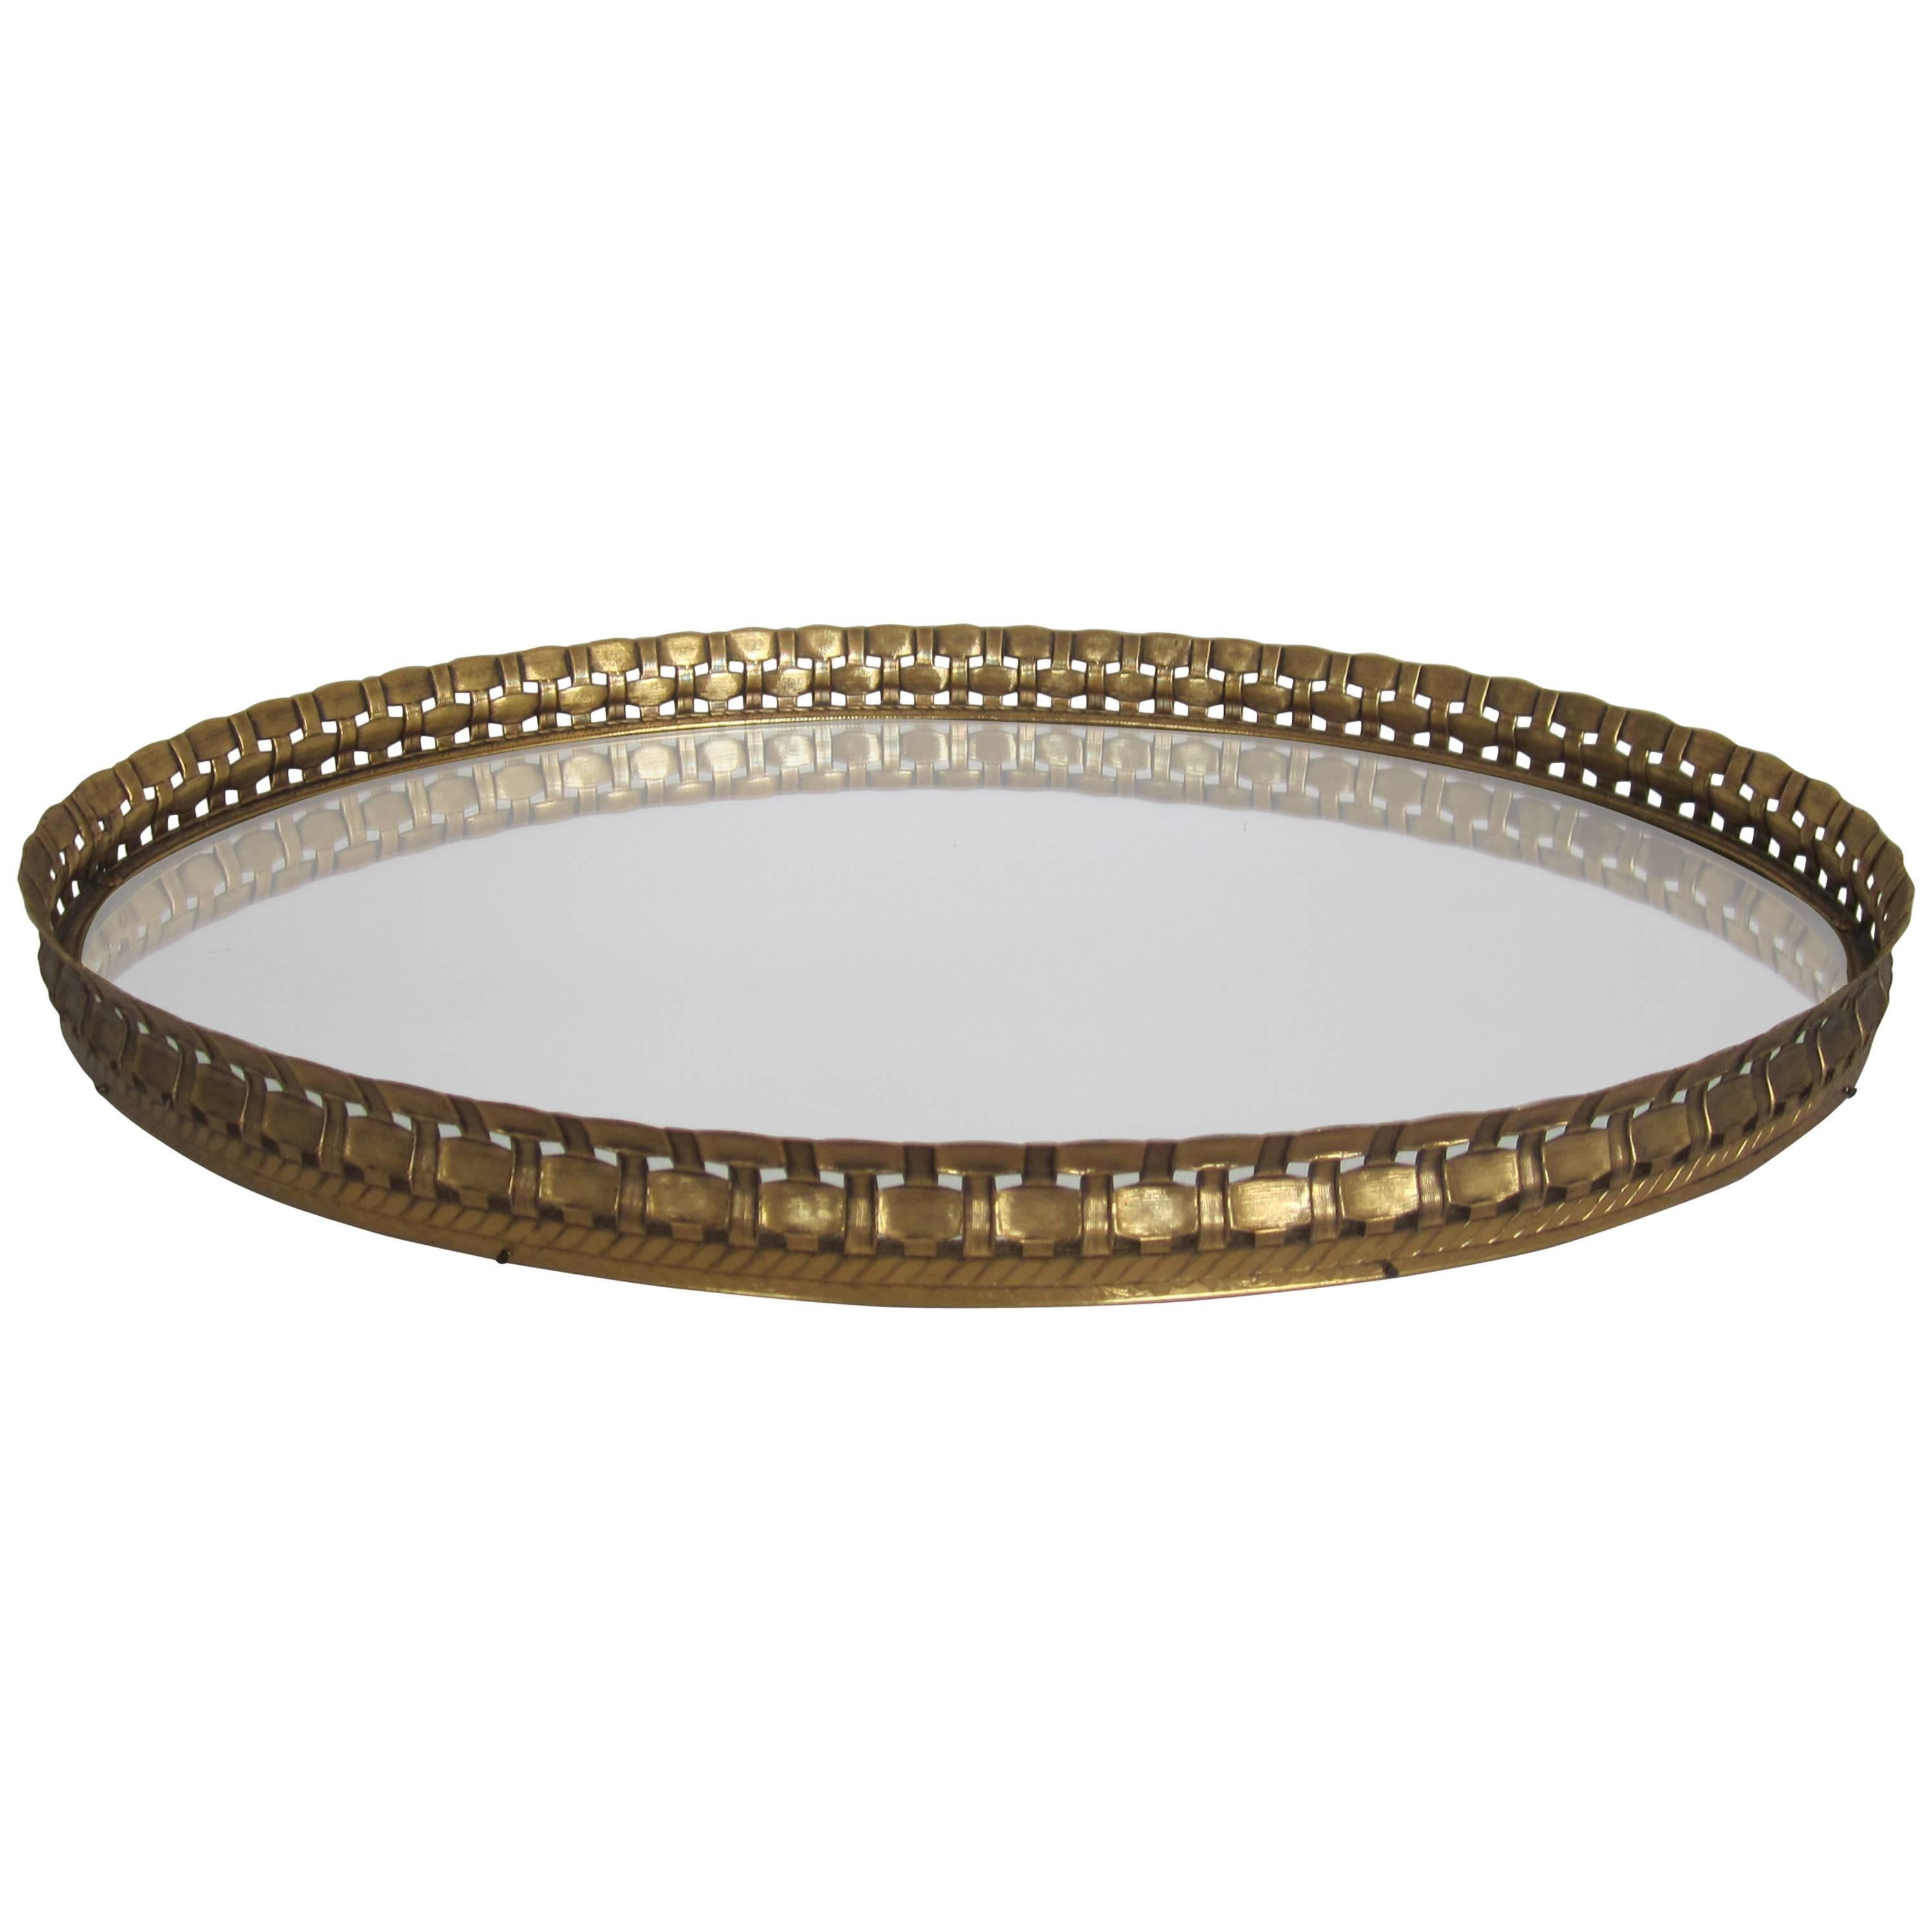 Beautiful Vintage Oval Brass and Mirror Vanity Tray